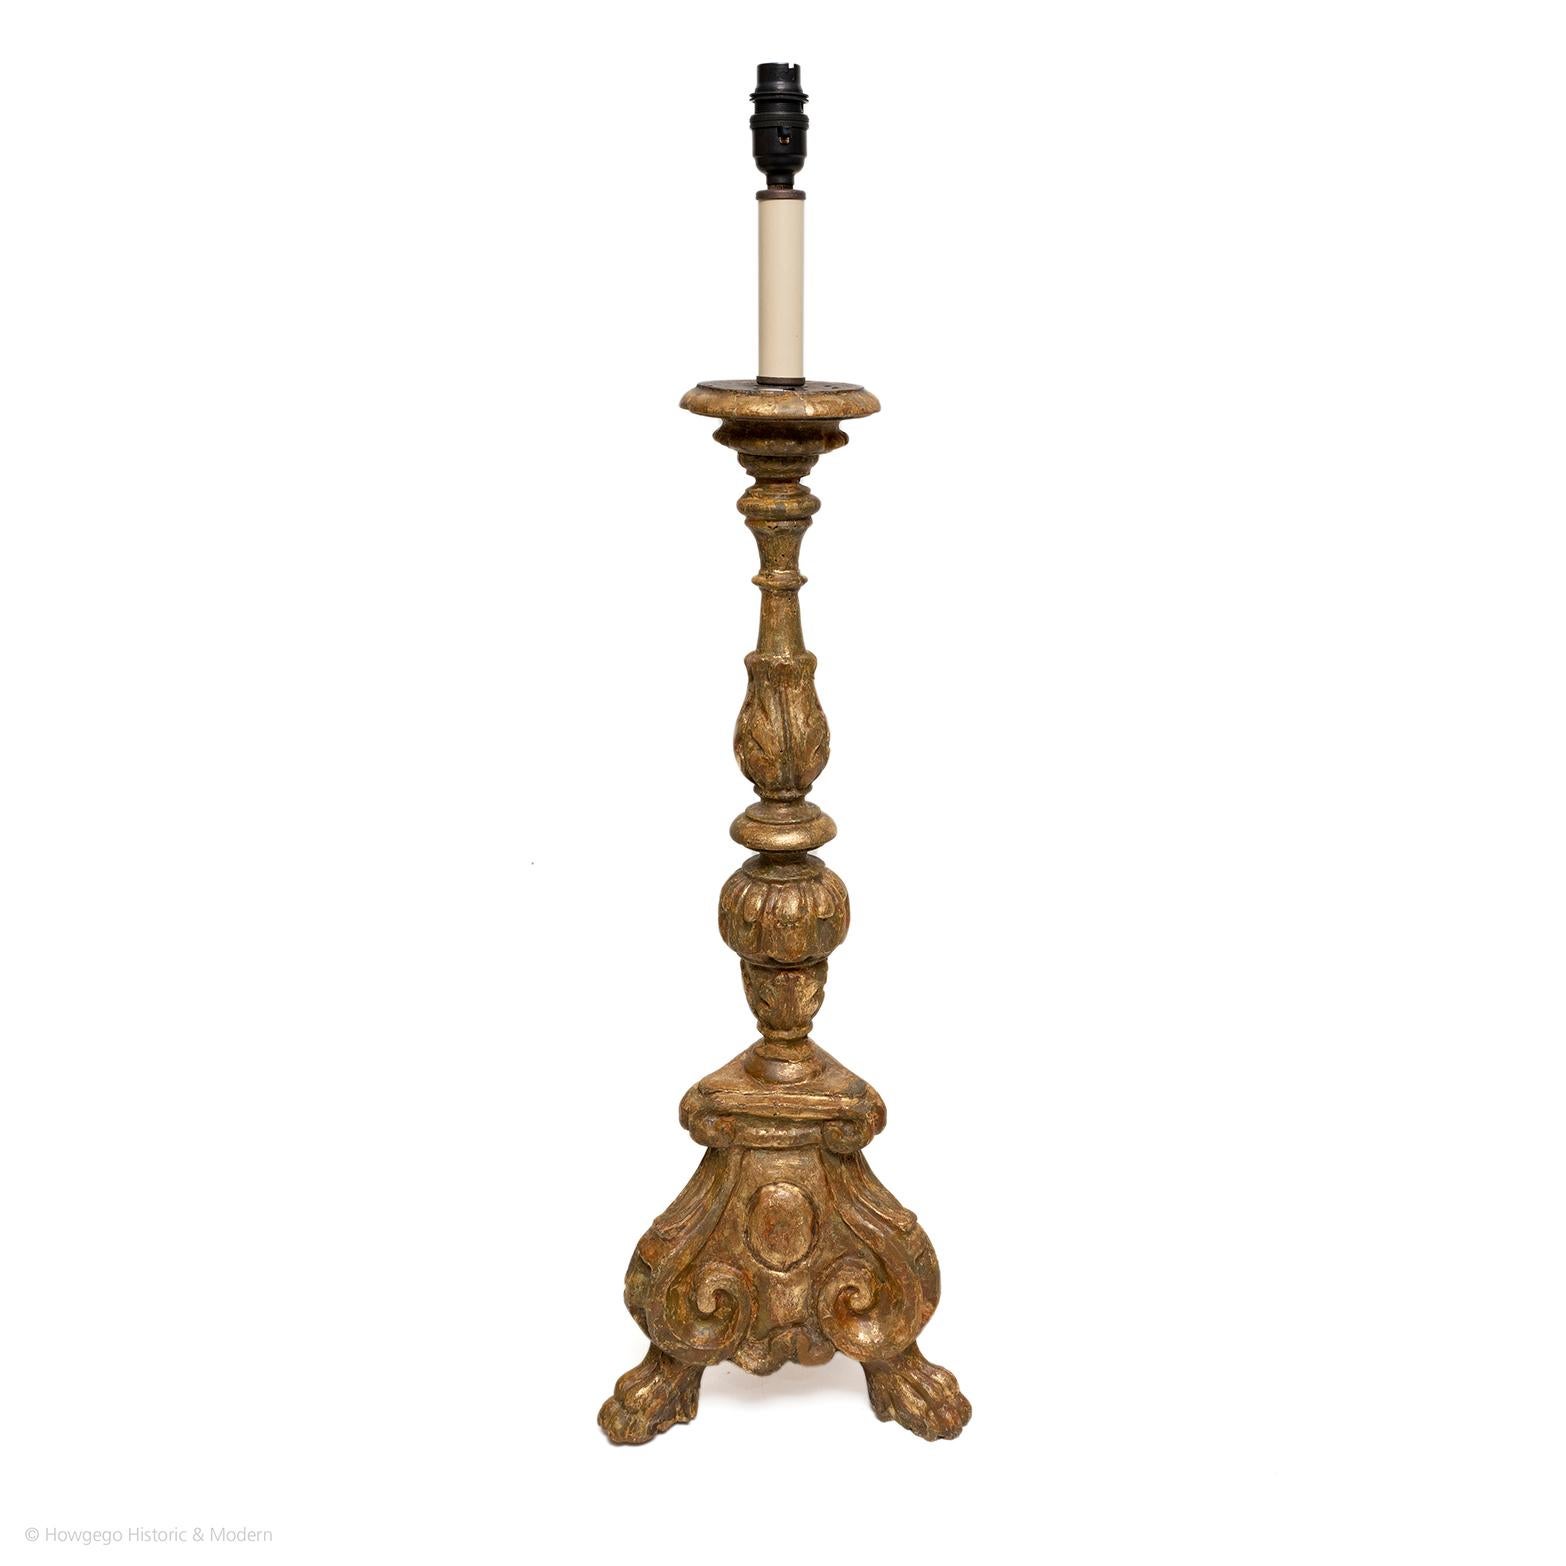 Fine, 18th Century, Italian, Carved & Gilded Pricket Candlestick Upcycled Into A Table Lamp, 31½” High

Finely carved with classical turnings and ornamentation, the gilding burnished to enhance the reflection of candlelight 
Injects classical